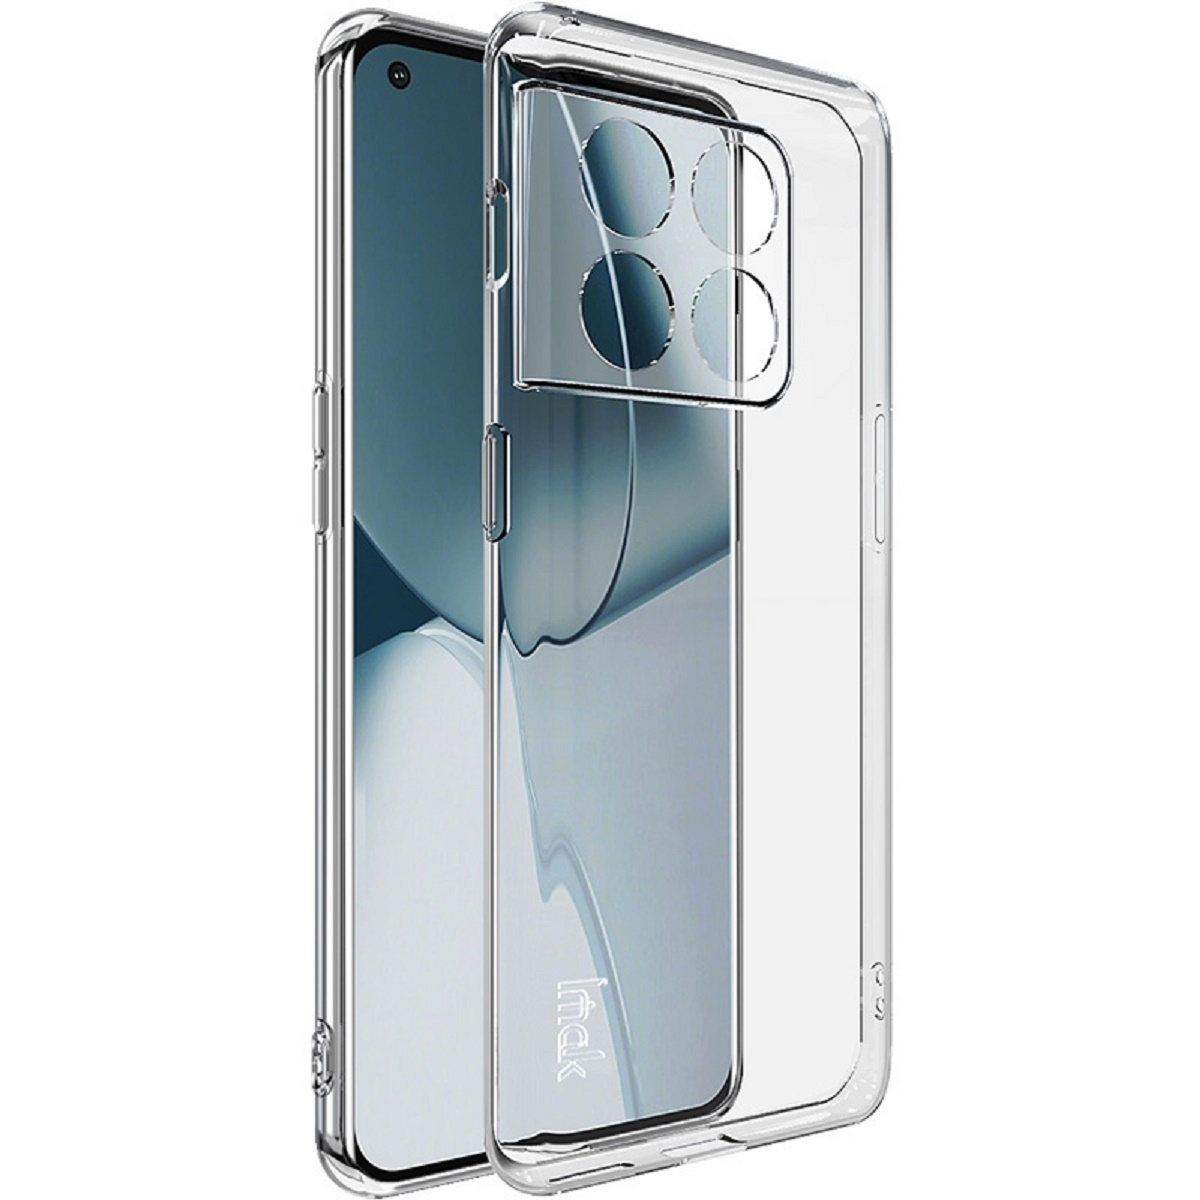 PROTECTORKING Backcover, Hülle, Pro, 10 OnePlus, Transparent Backcover